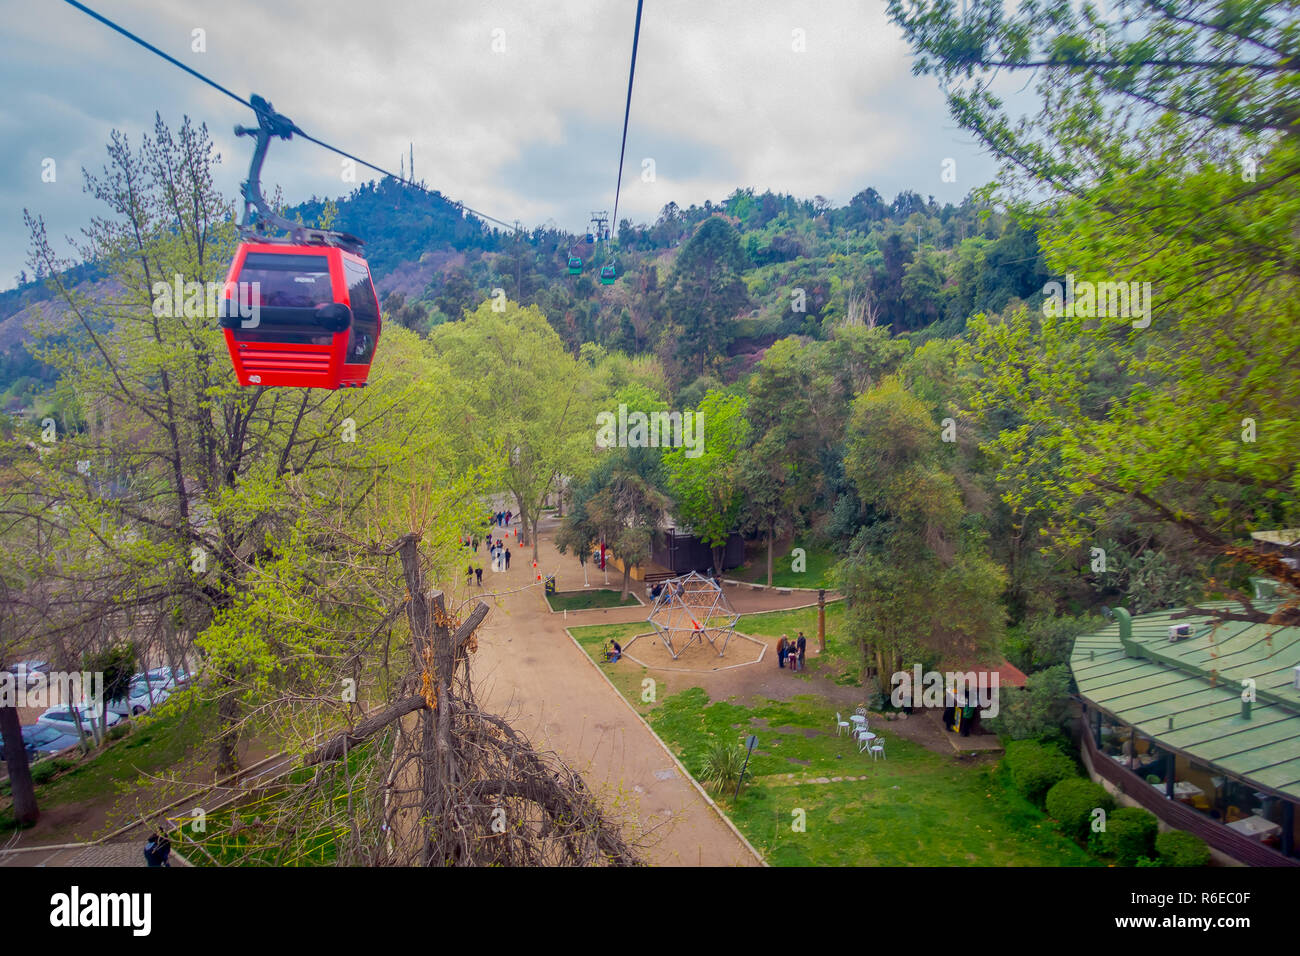 SANTIAGO, CHILE - OCTOBER 16, 2018: Cable car in San Cristobal hill, overlooking a panoramic view of Santiago de Chile Stock Photo